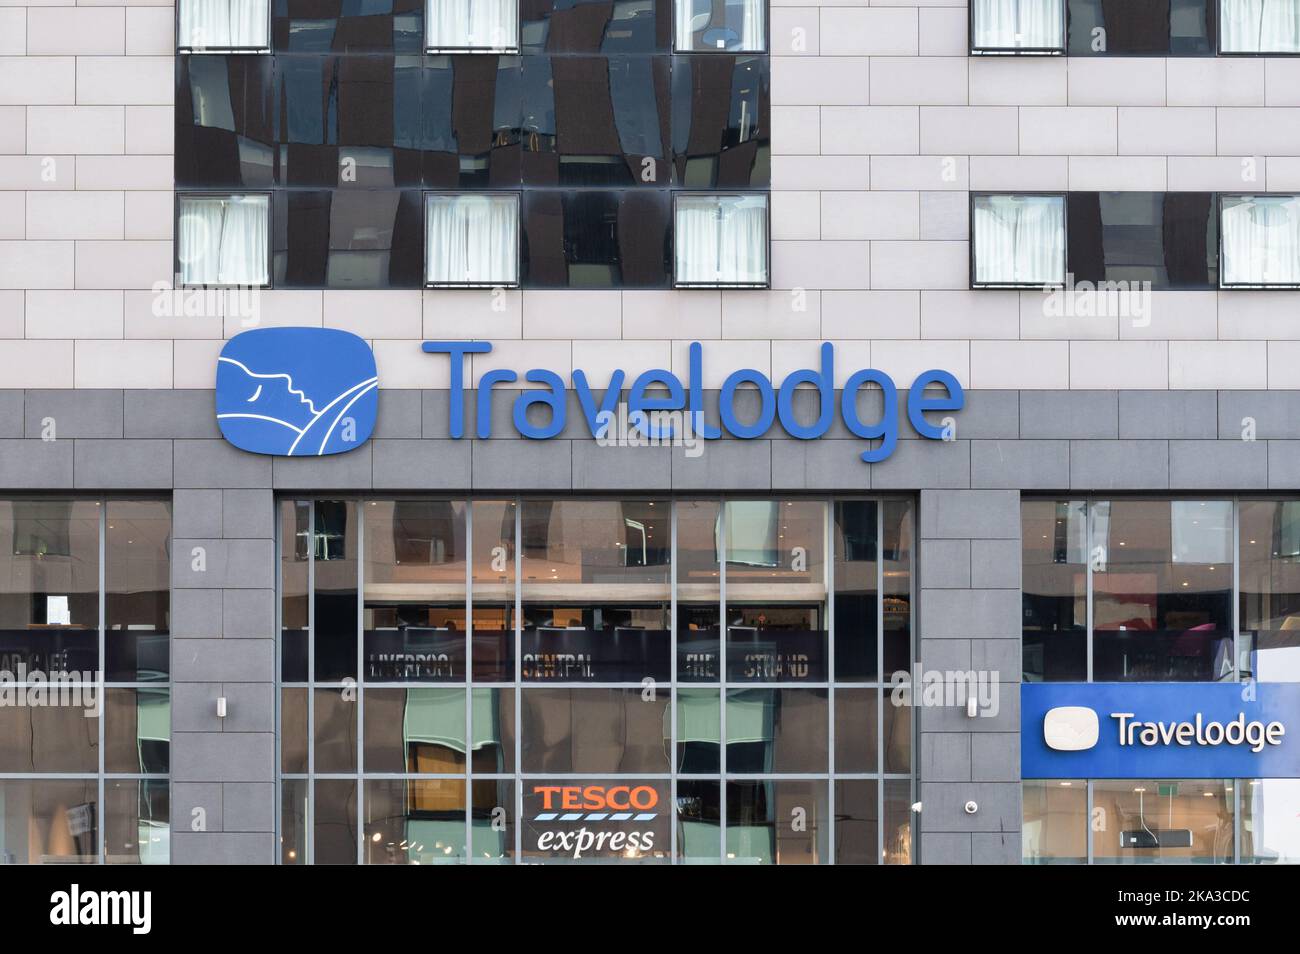 Liverpool, UK- Sept 7, 2022: The Travelodge Hotel in Liverpool England Stock Photo